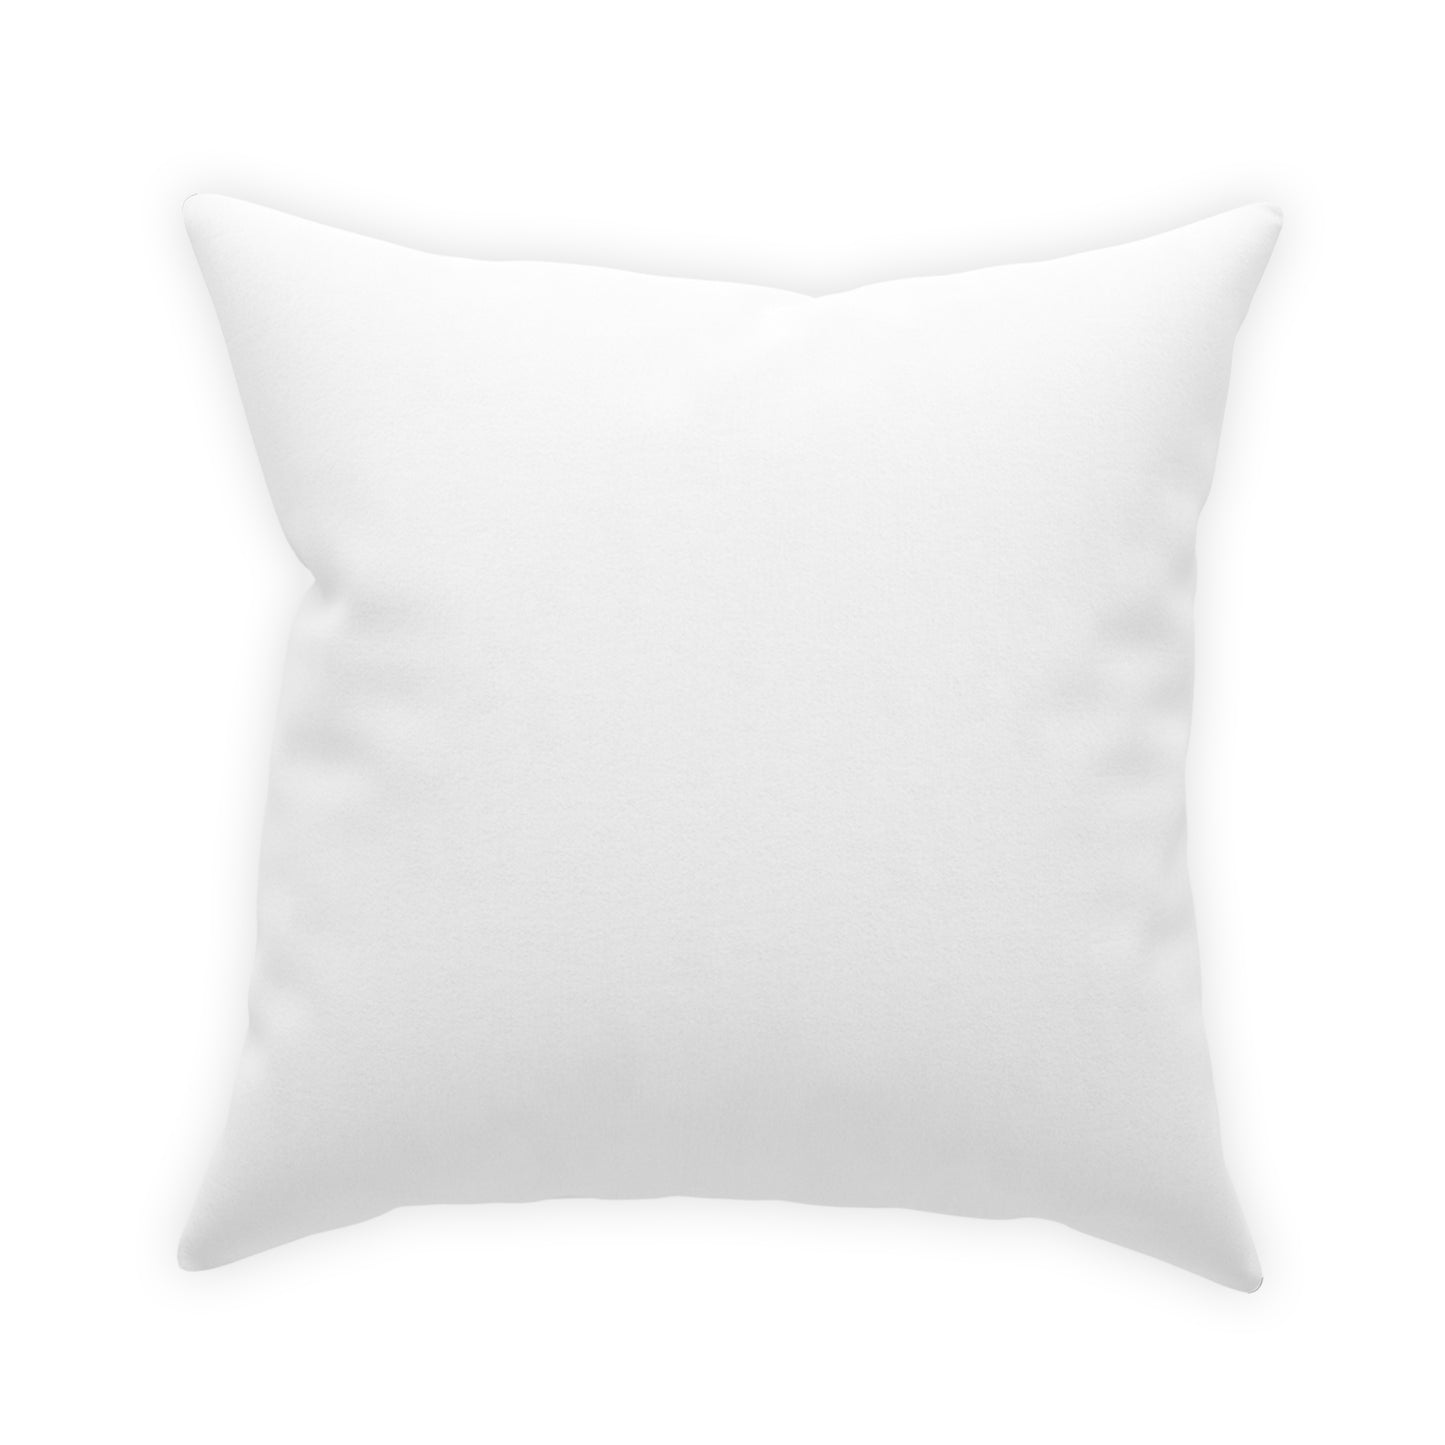 Broadcloth Pillow "Well dam"